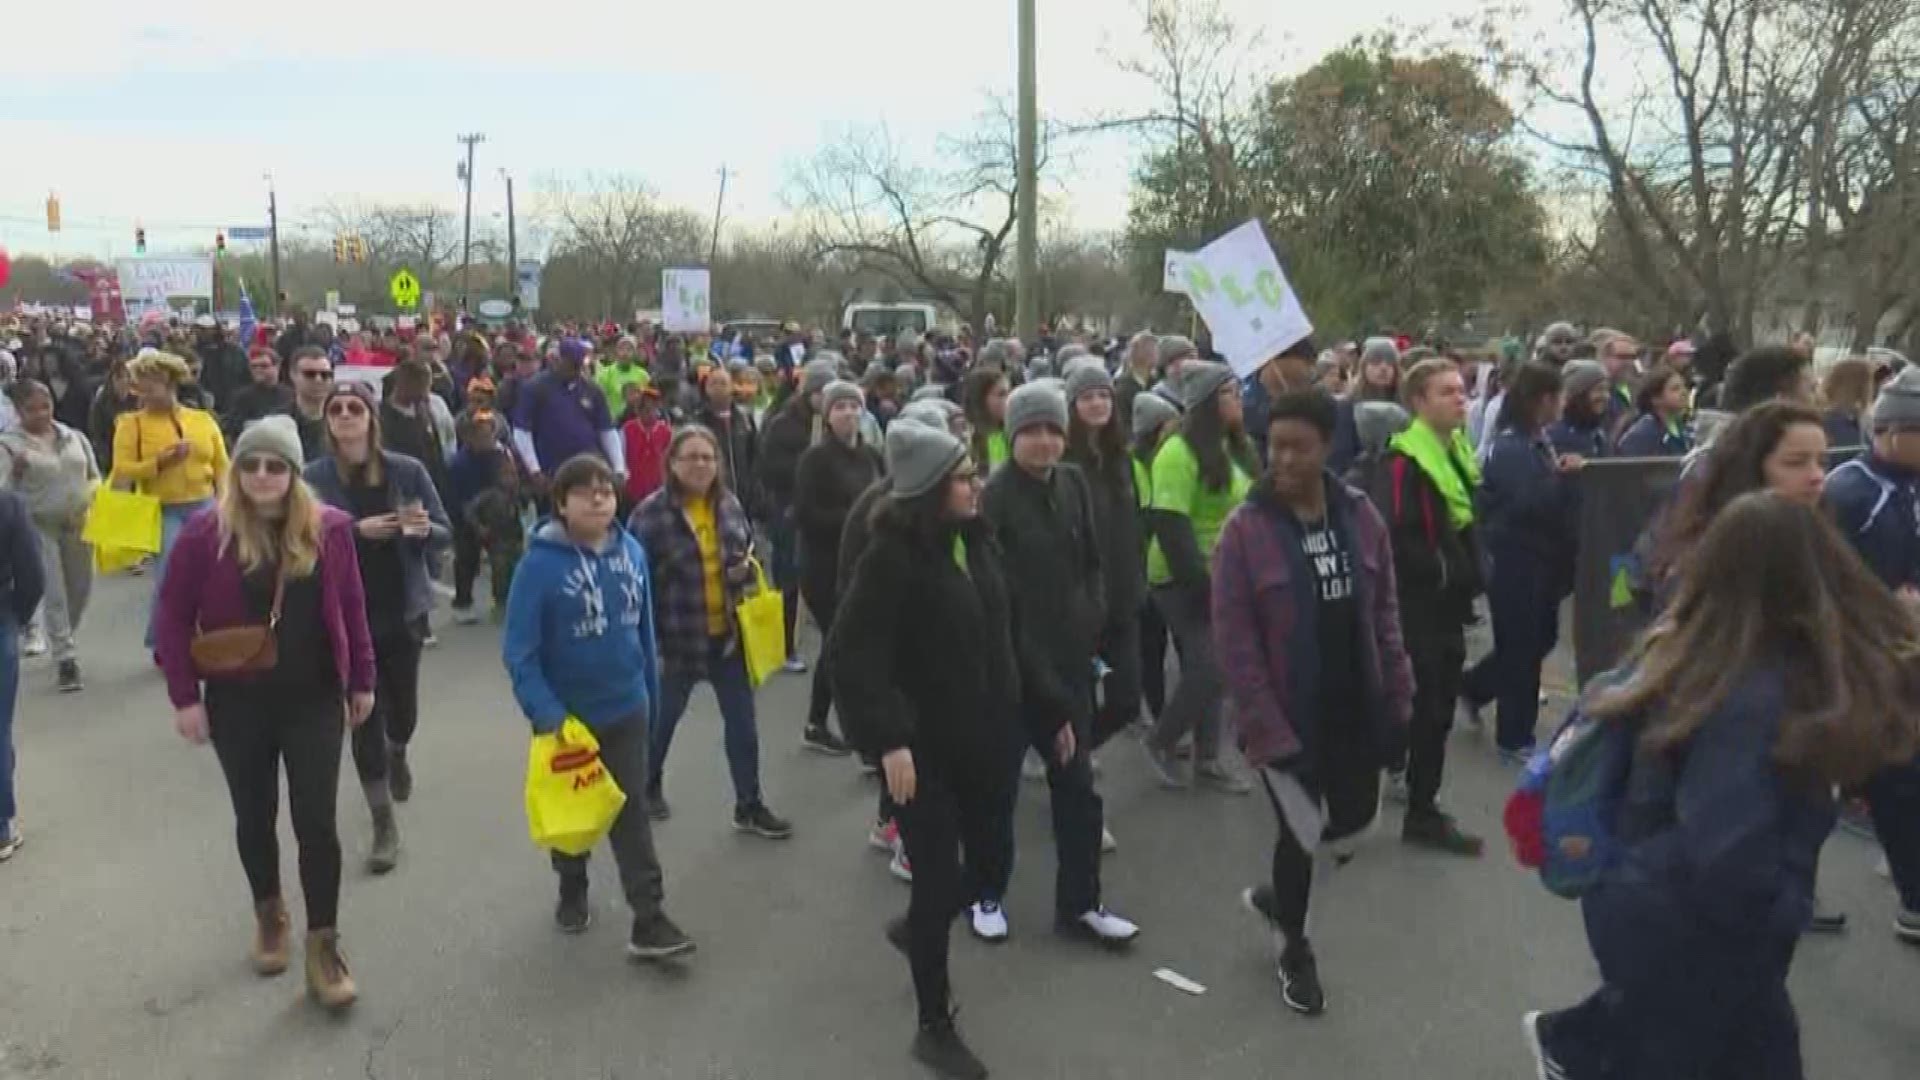 For the 32nd year, the city held an official march to honor the life and legacy of Dr. Martin Luther King, Jr.